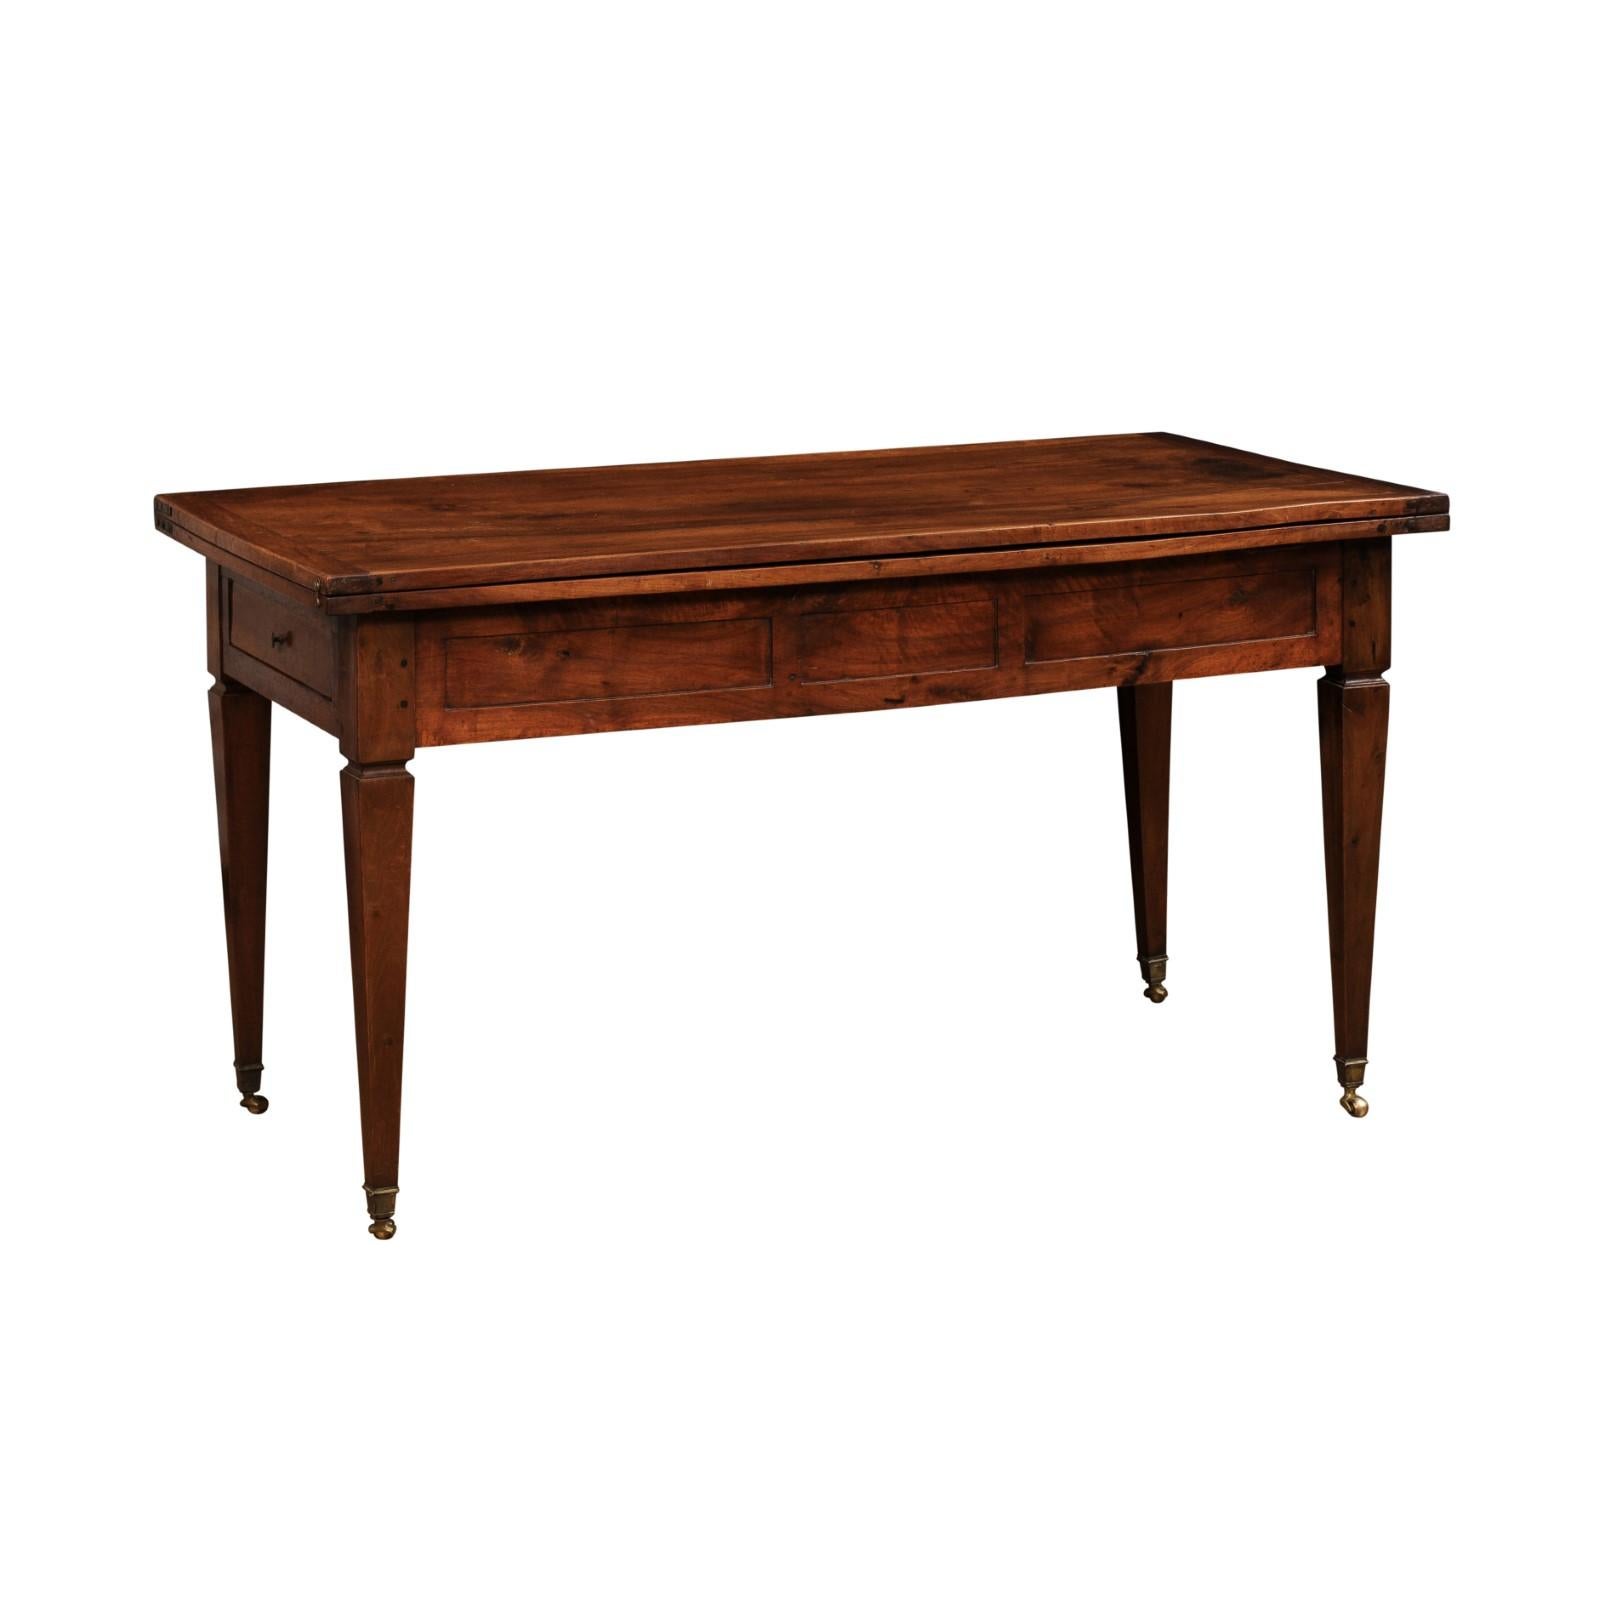 French Directoire Style 19th Century Walnut Table with Folding Top, Tapered Legs For Sale 11